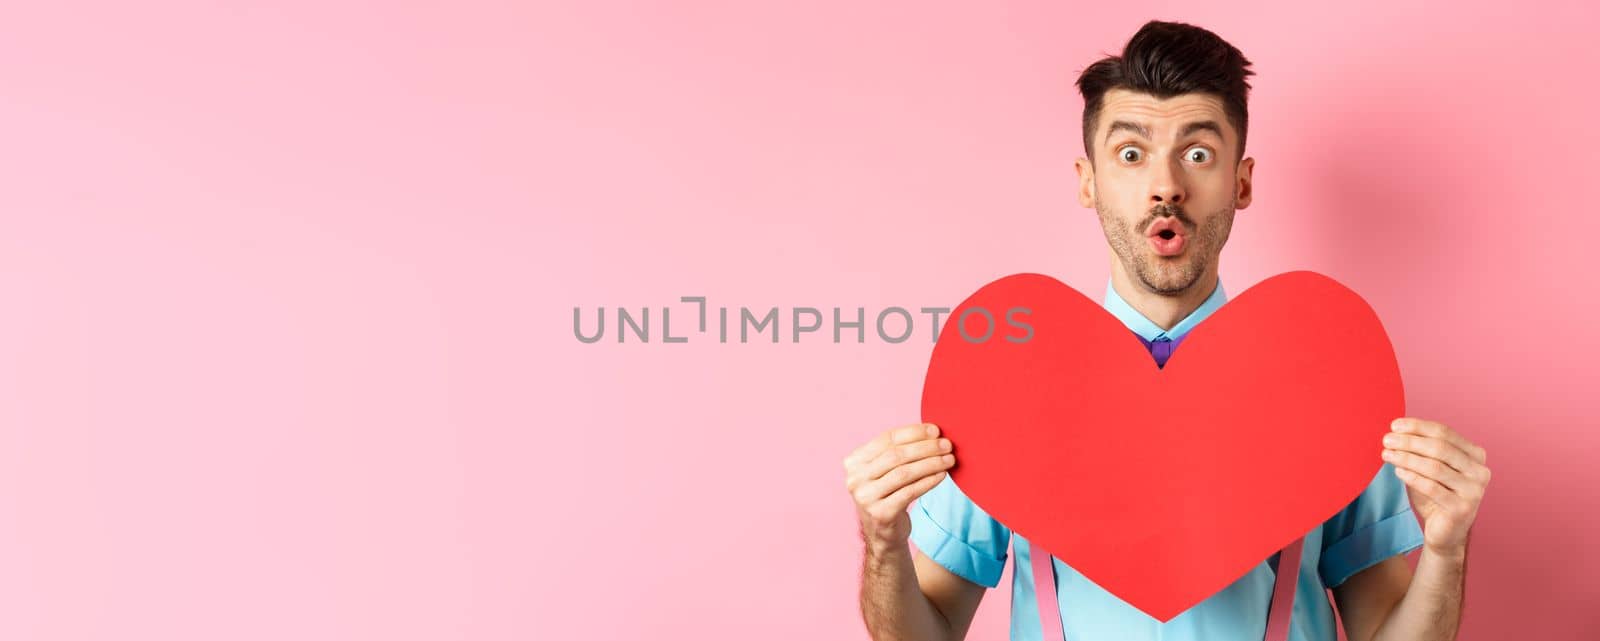 Valentines day concept. Amused young man with bow-tie and moustache, showing heart cutout and looking for love, standing on pink romantic background.